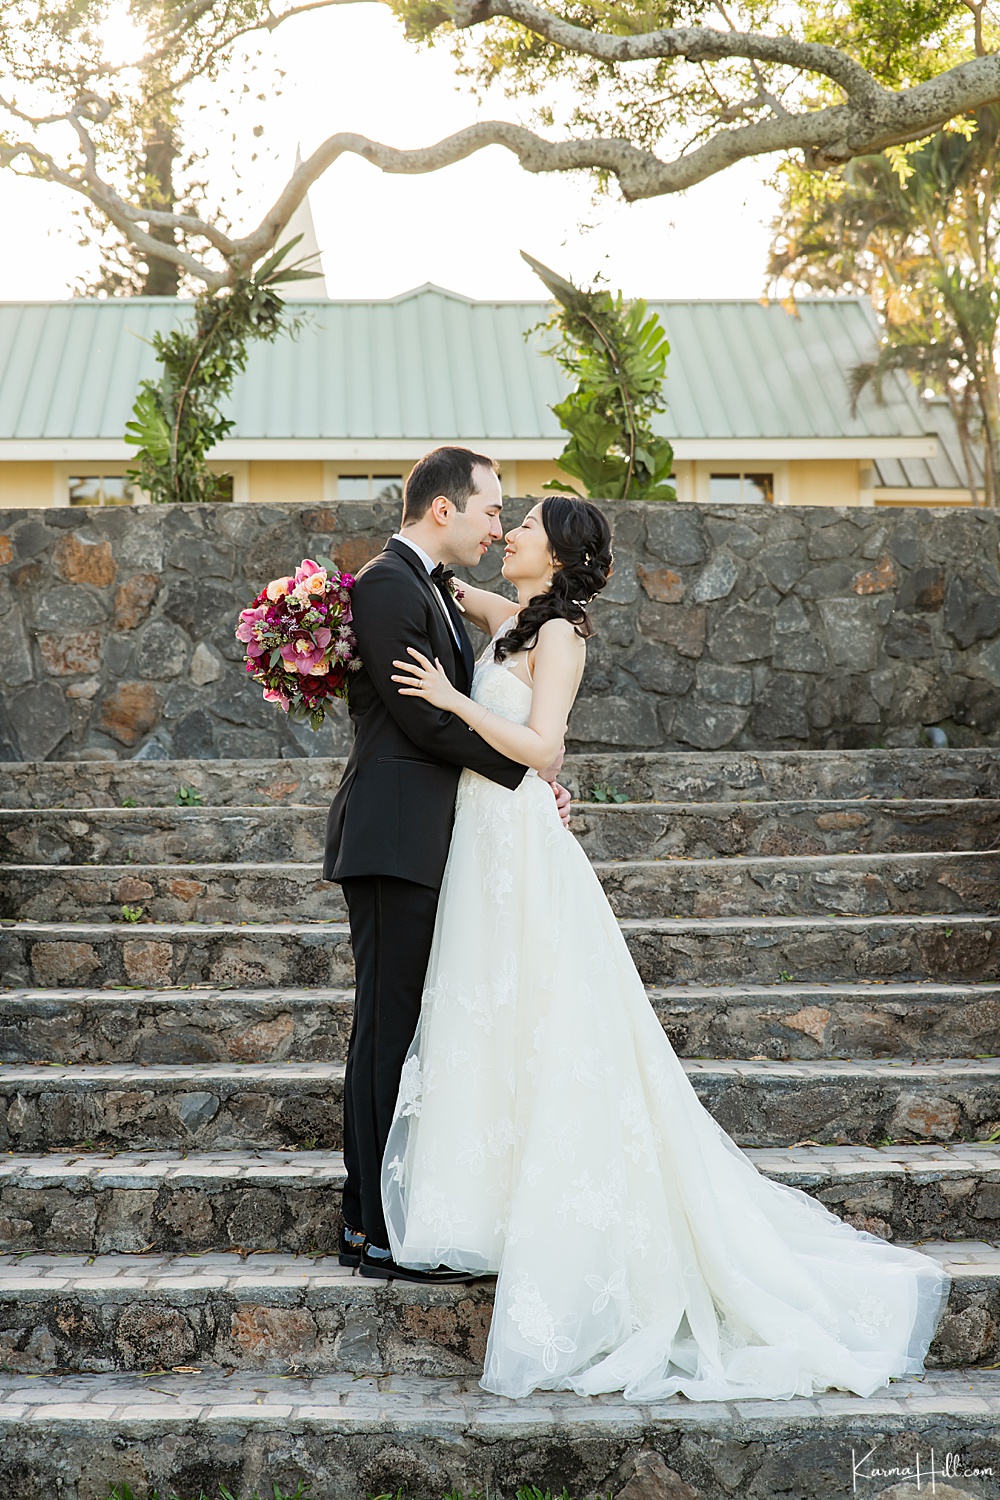 elope at the maui steeple house 